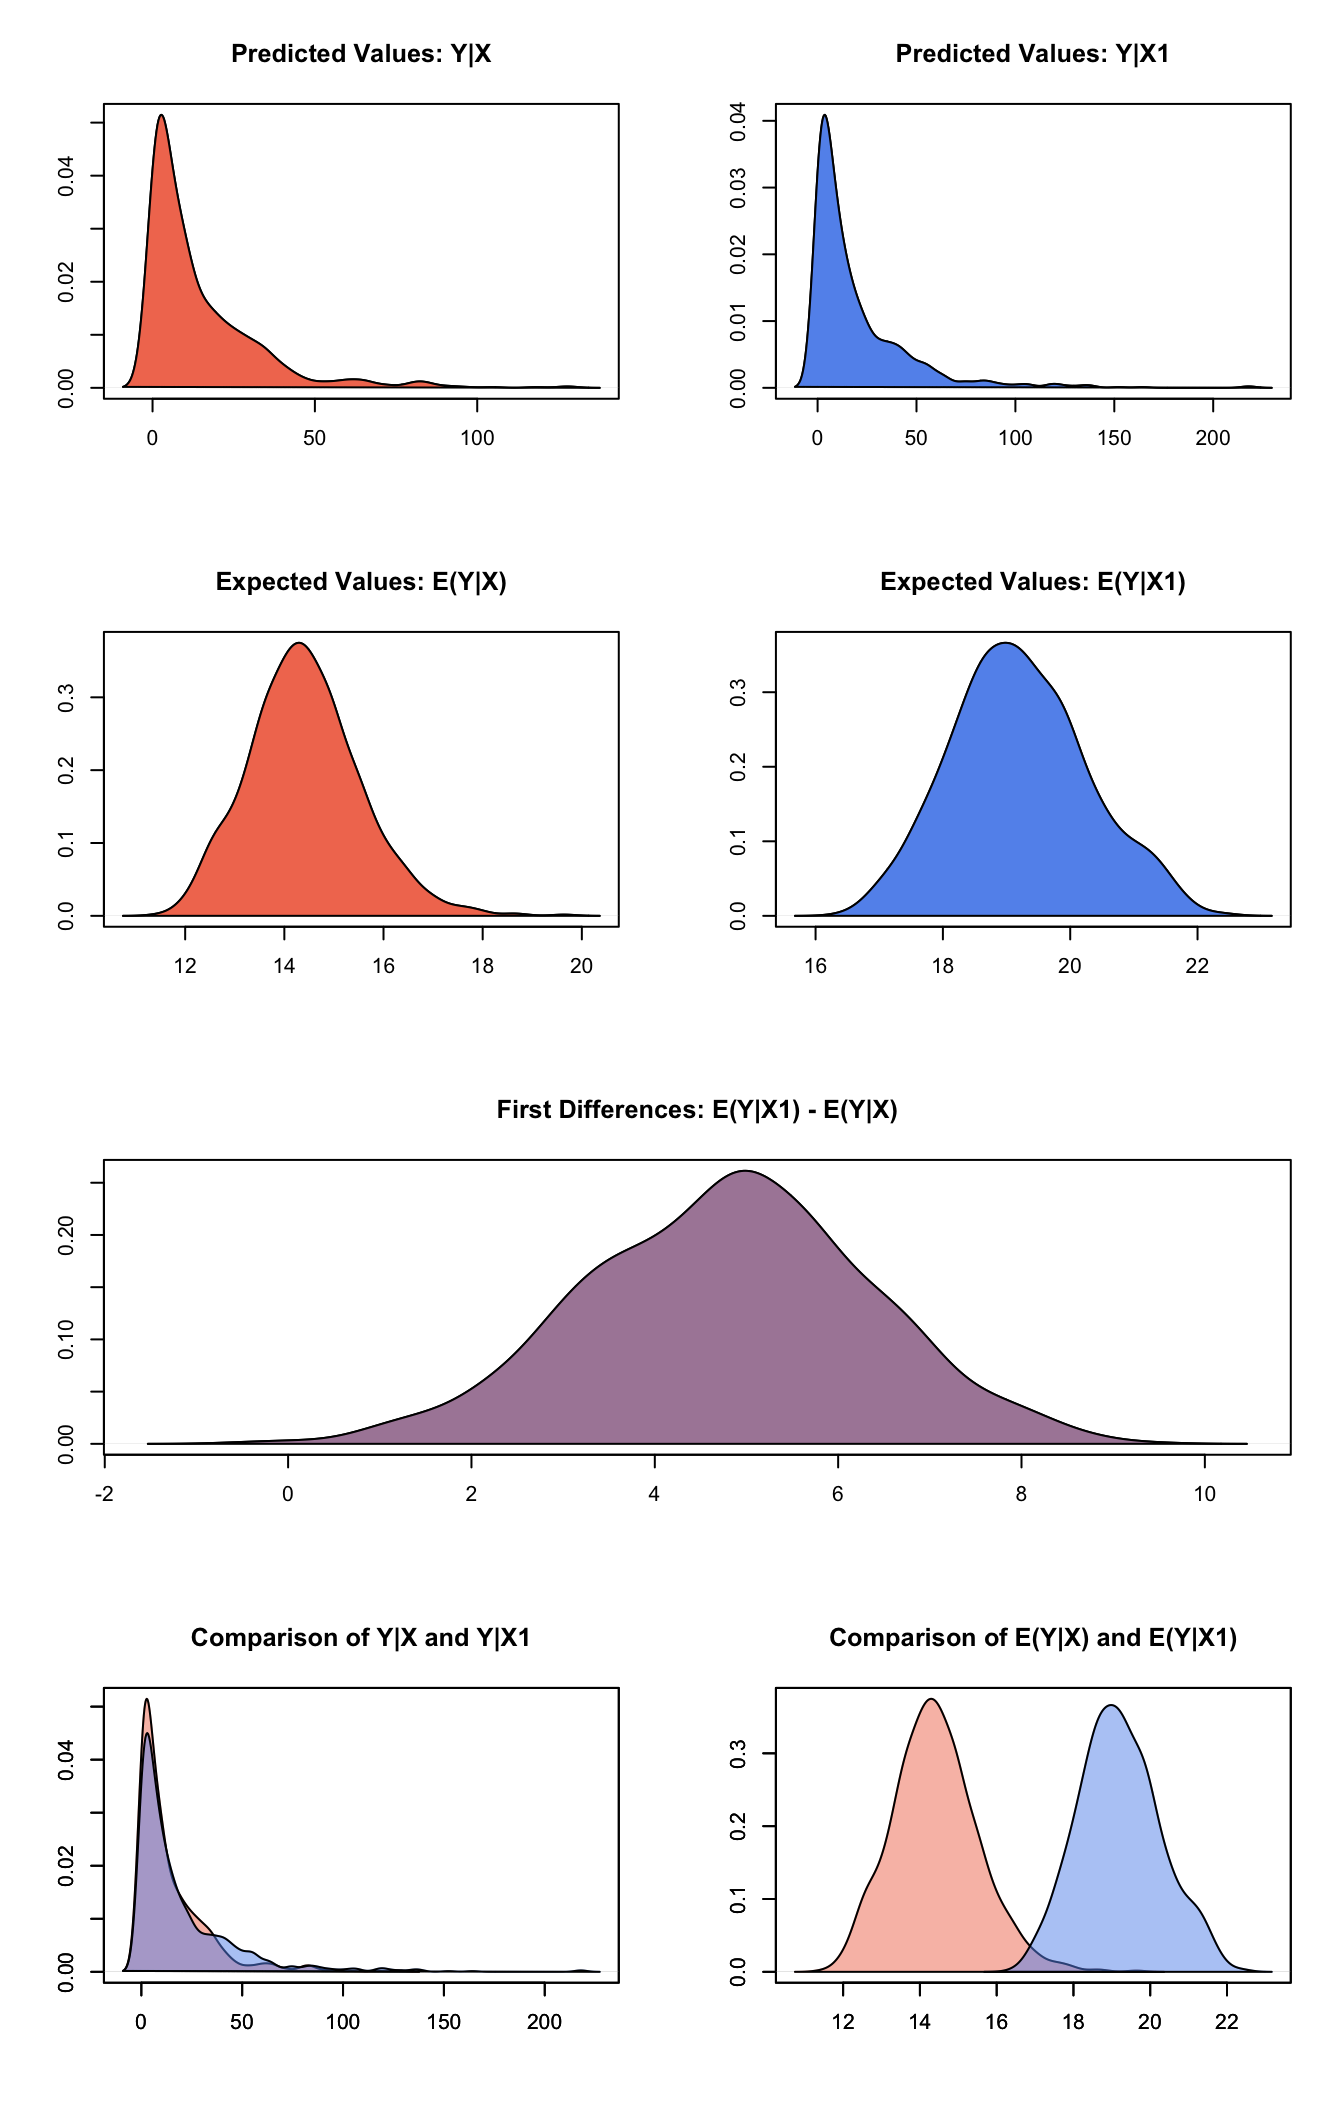 Graphs of Quantities of Interest for Gamma GEE